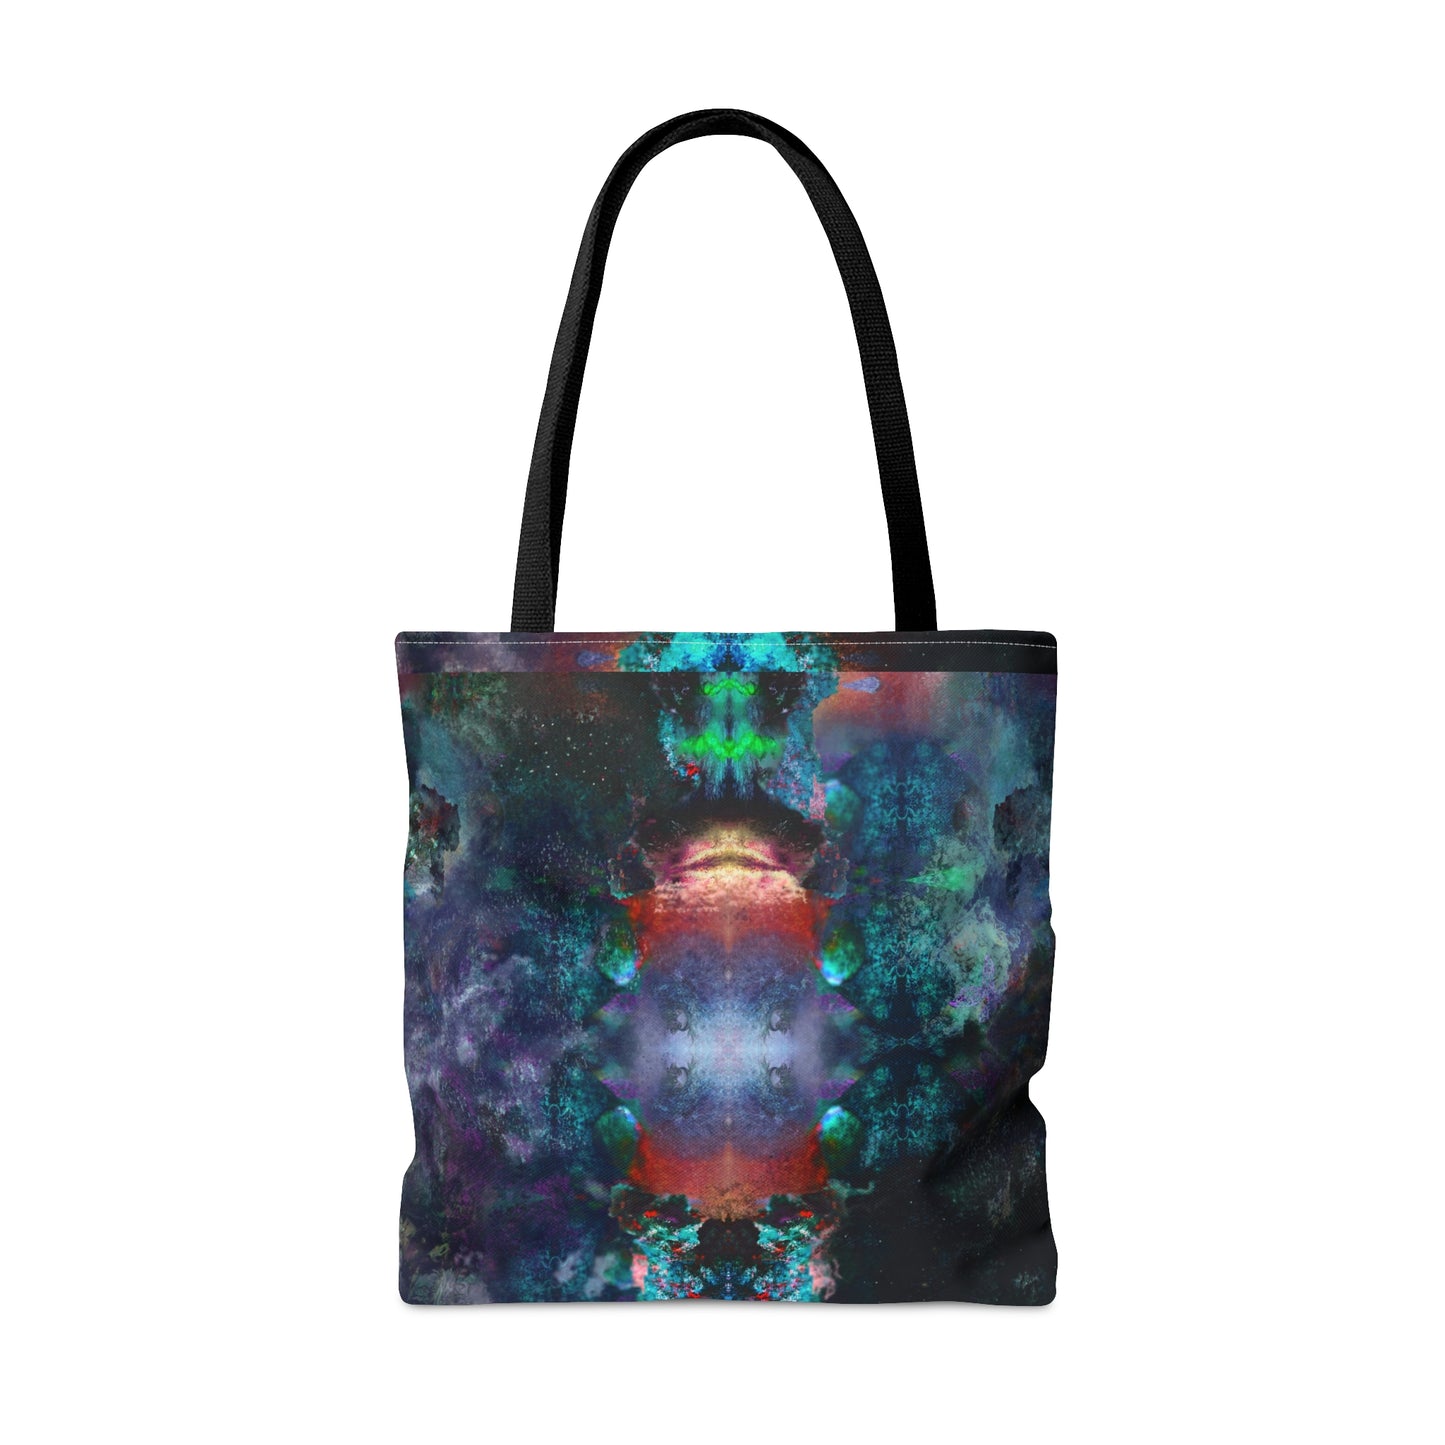 "Opposition Lies Within" Tote Bag